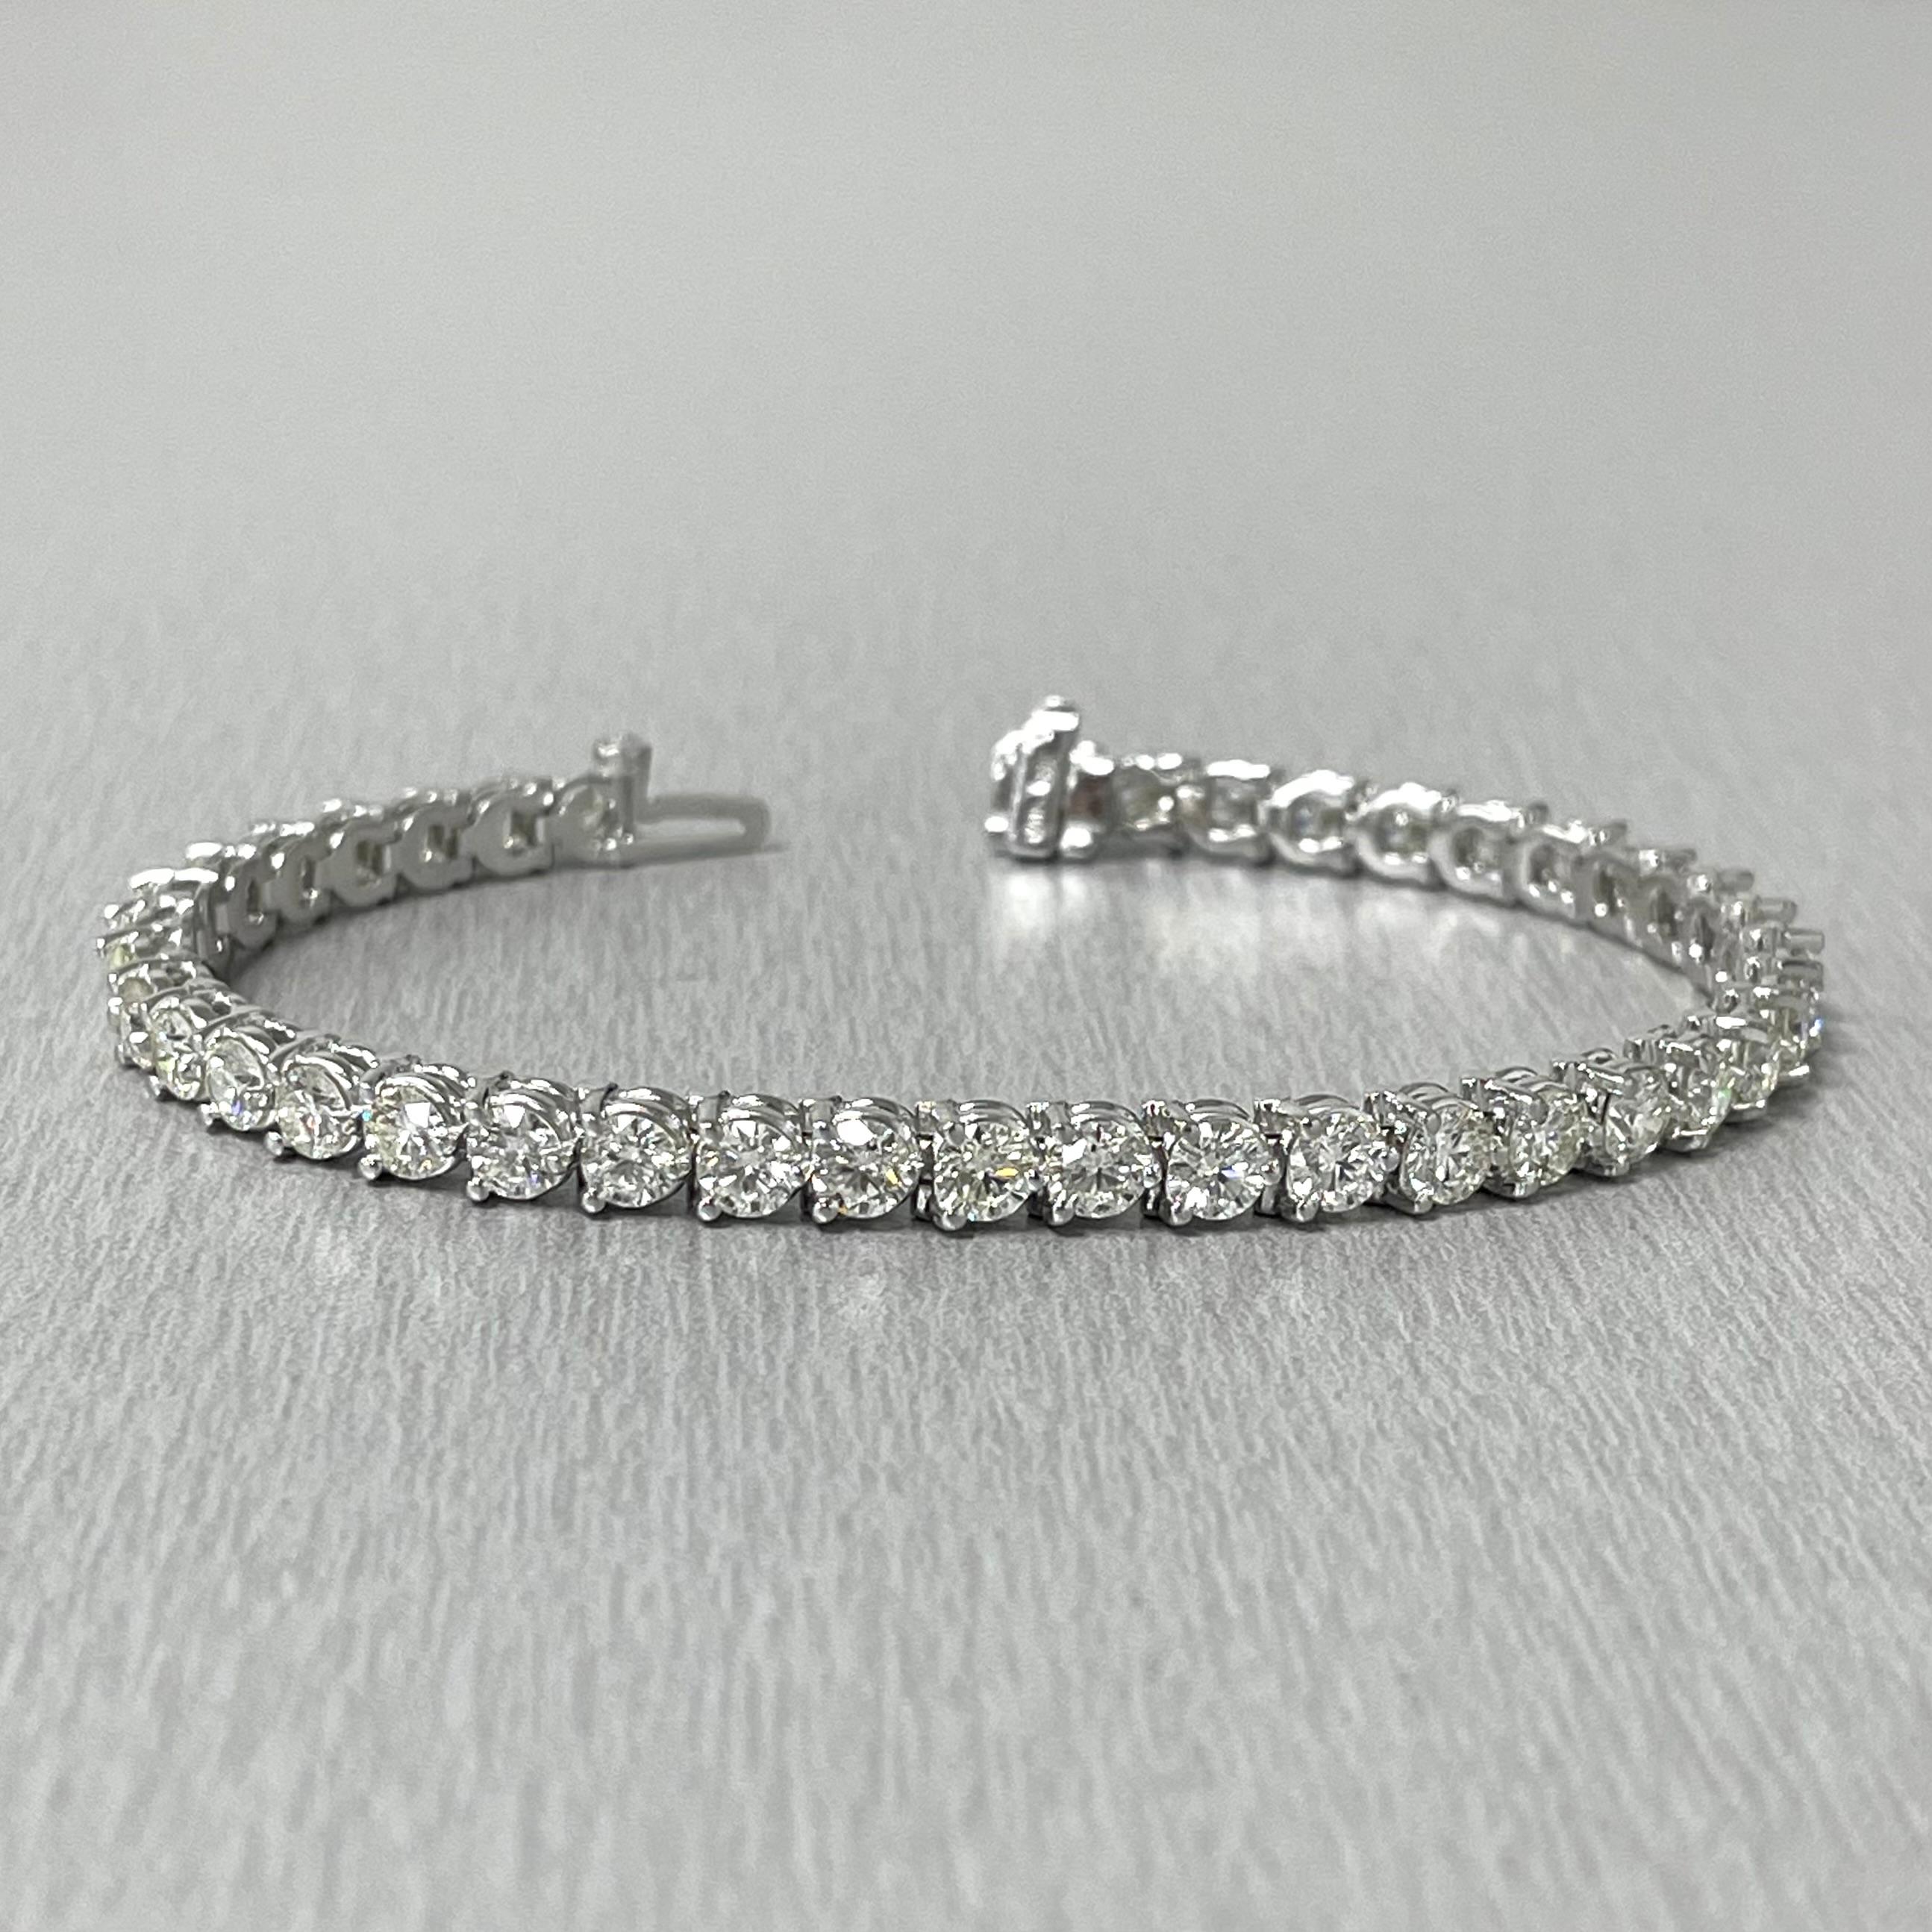 A diamond tennis bracelet is the most elegant and classic piece of evergreen jewelry. It is feminine, comfortable and accentuates a woman's wrist with brilliance and sparkles. All our bracelets have two locks for added security. The type of lock may